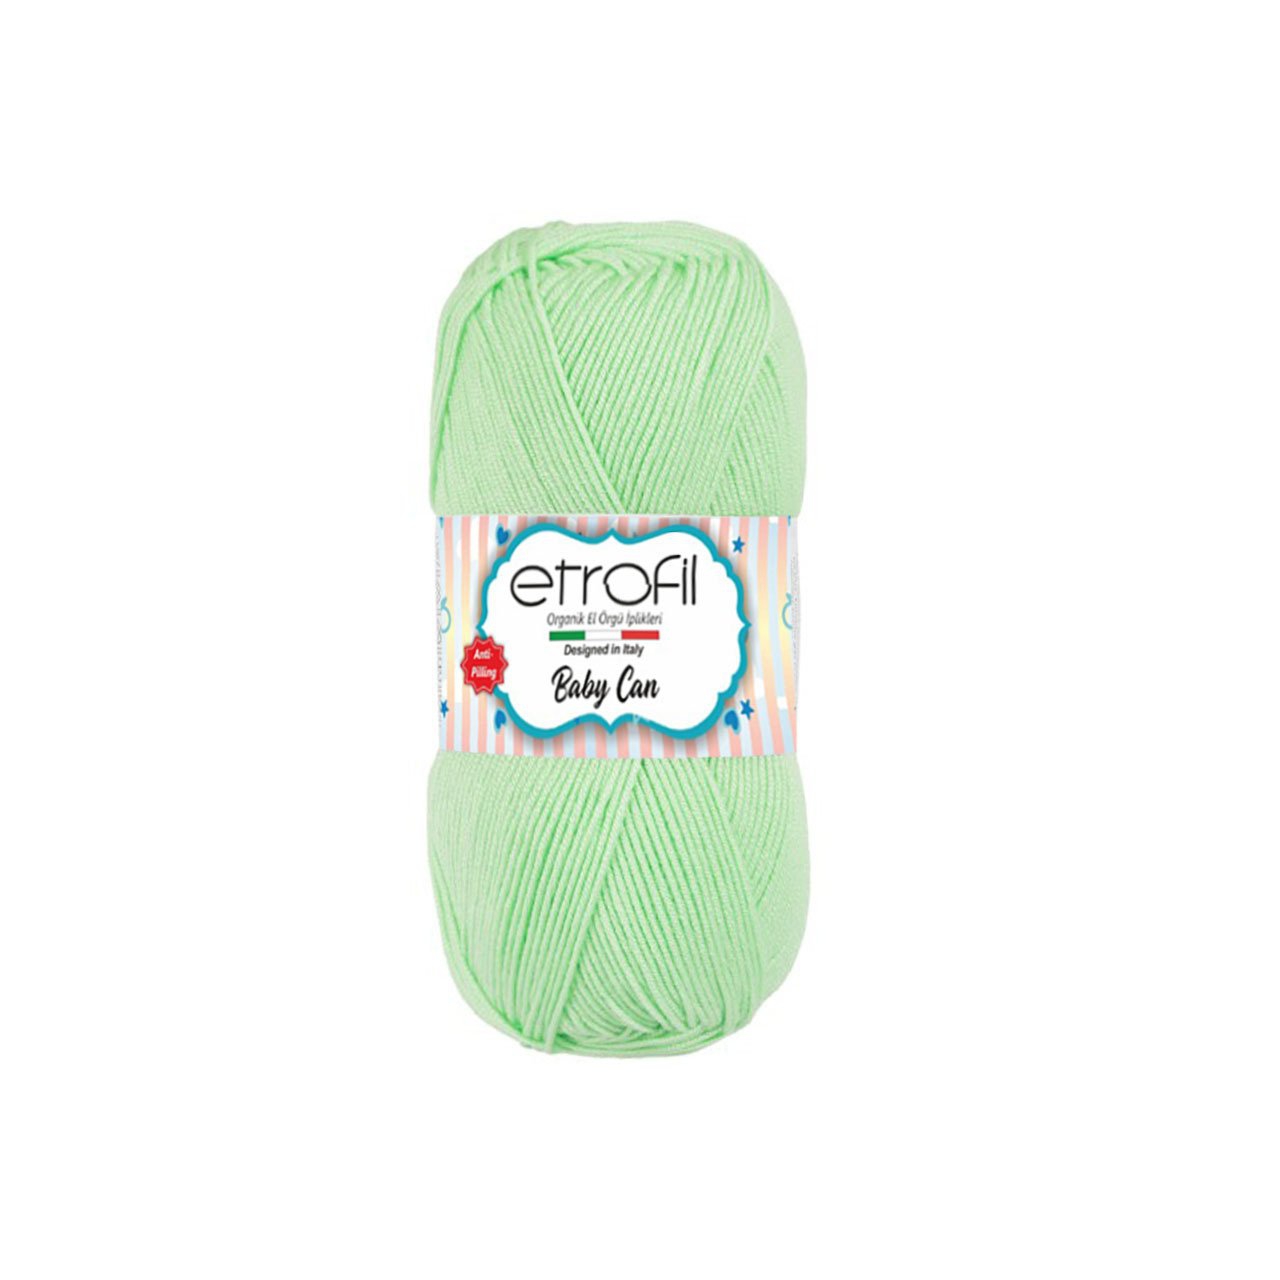 Etrofil Baby Can 80046